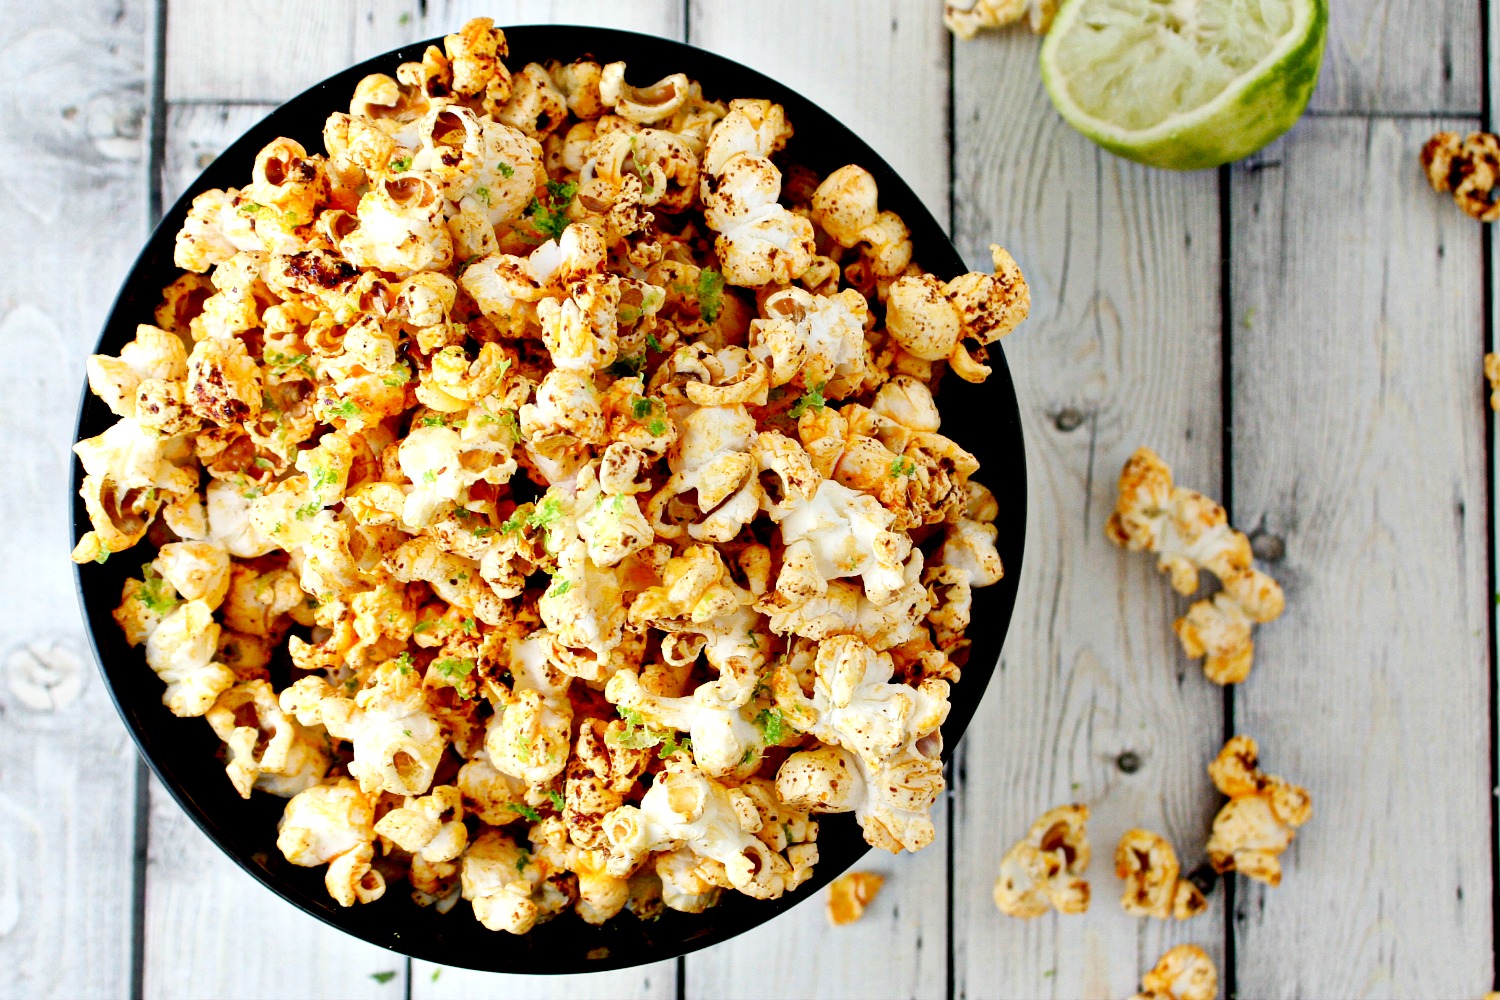 Chili and Lime Popcorn 2